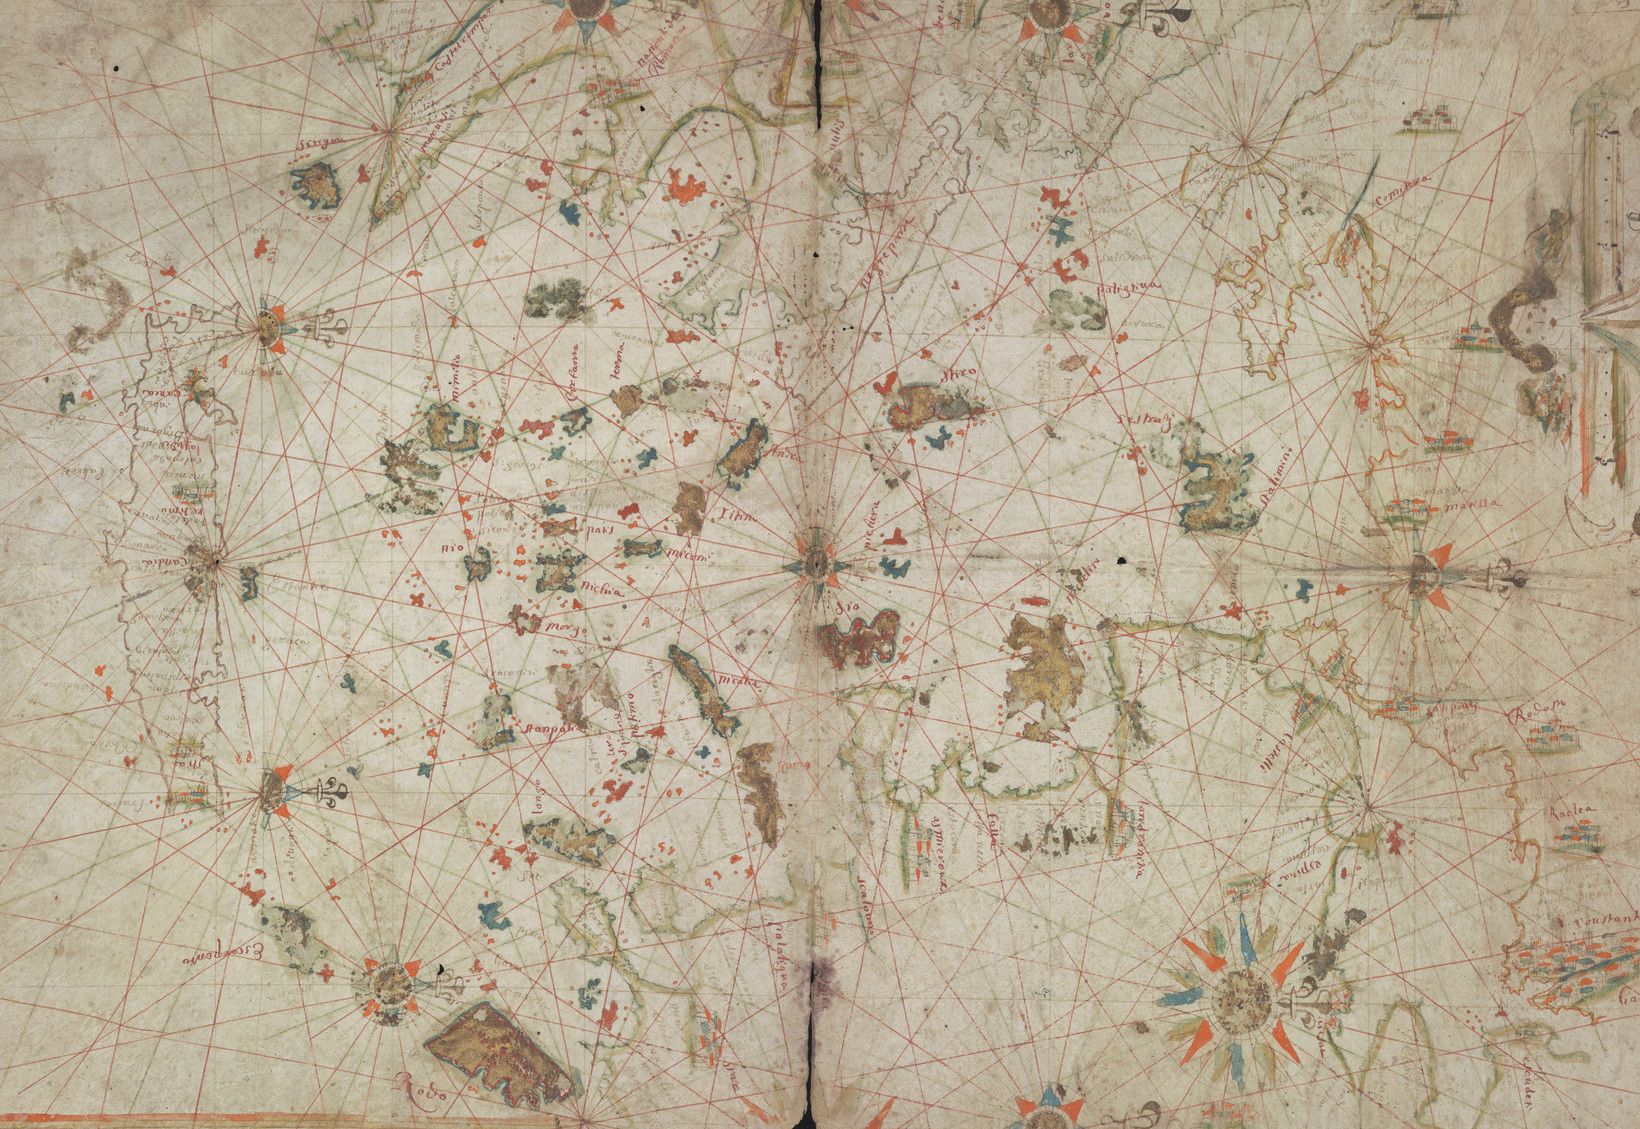 Mapping the world - one digitisation at a time